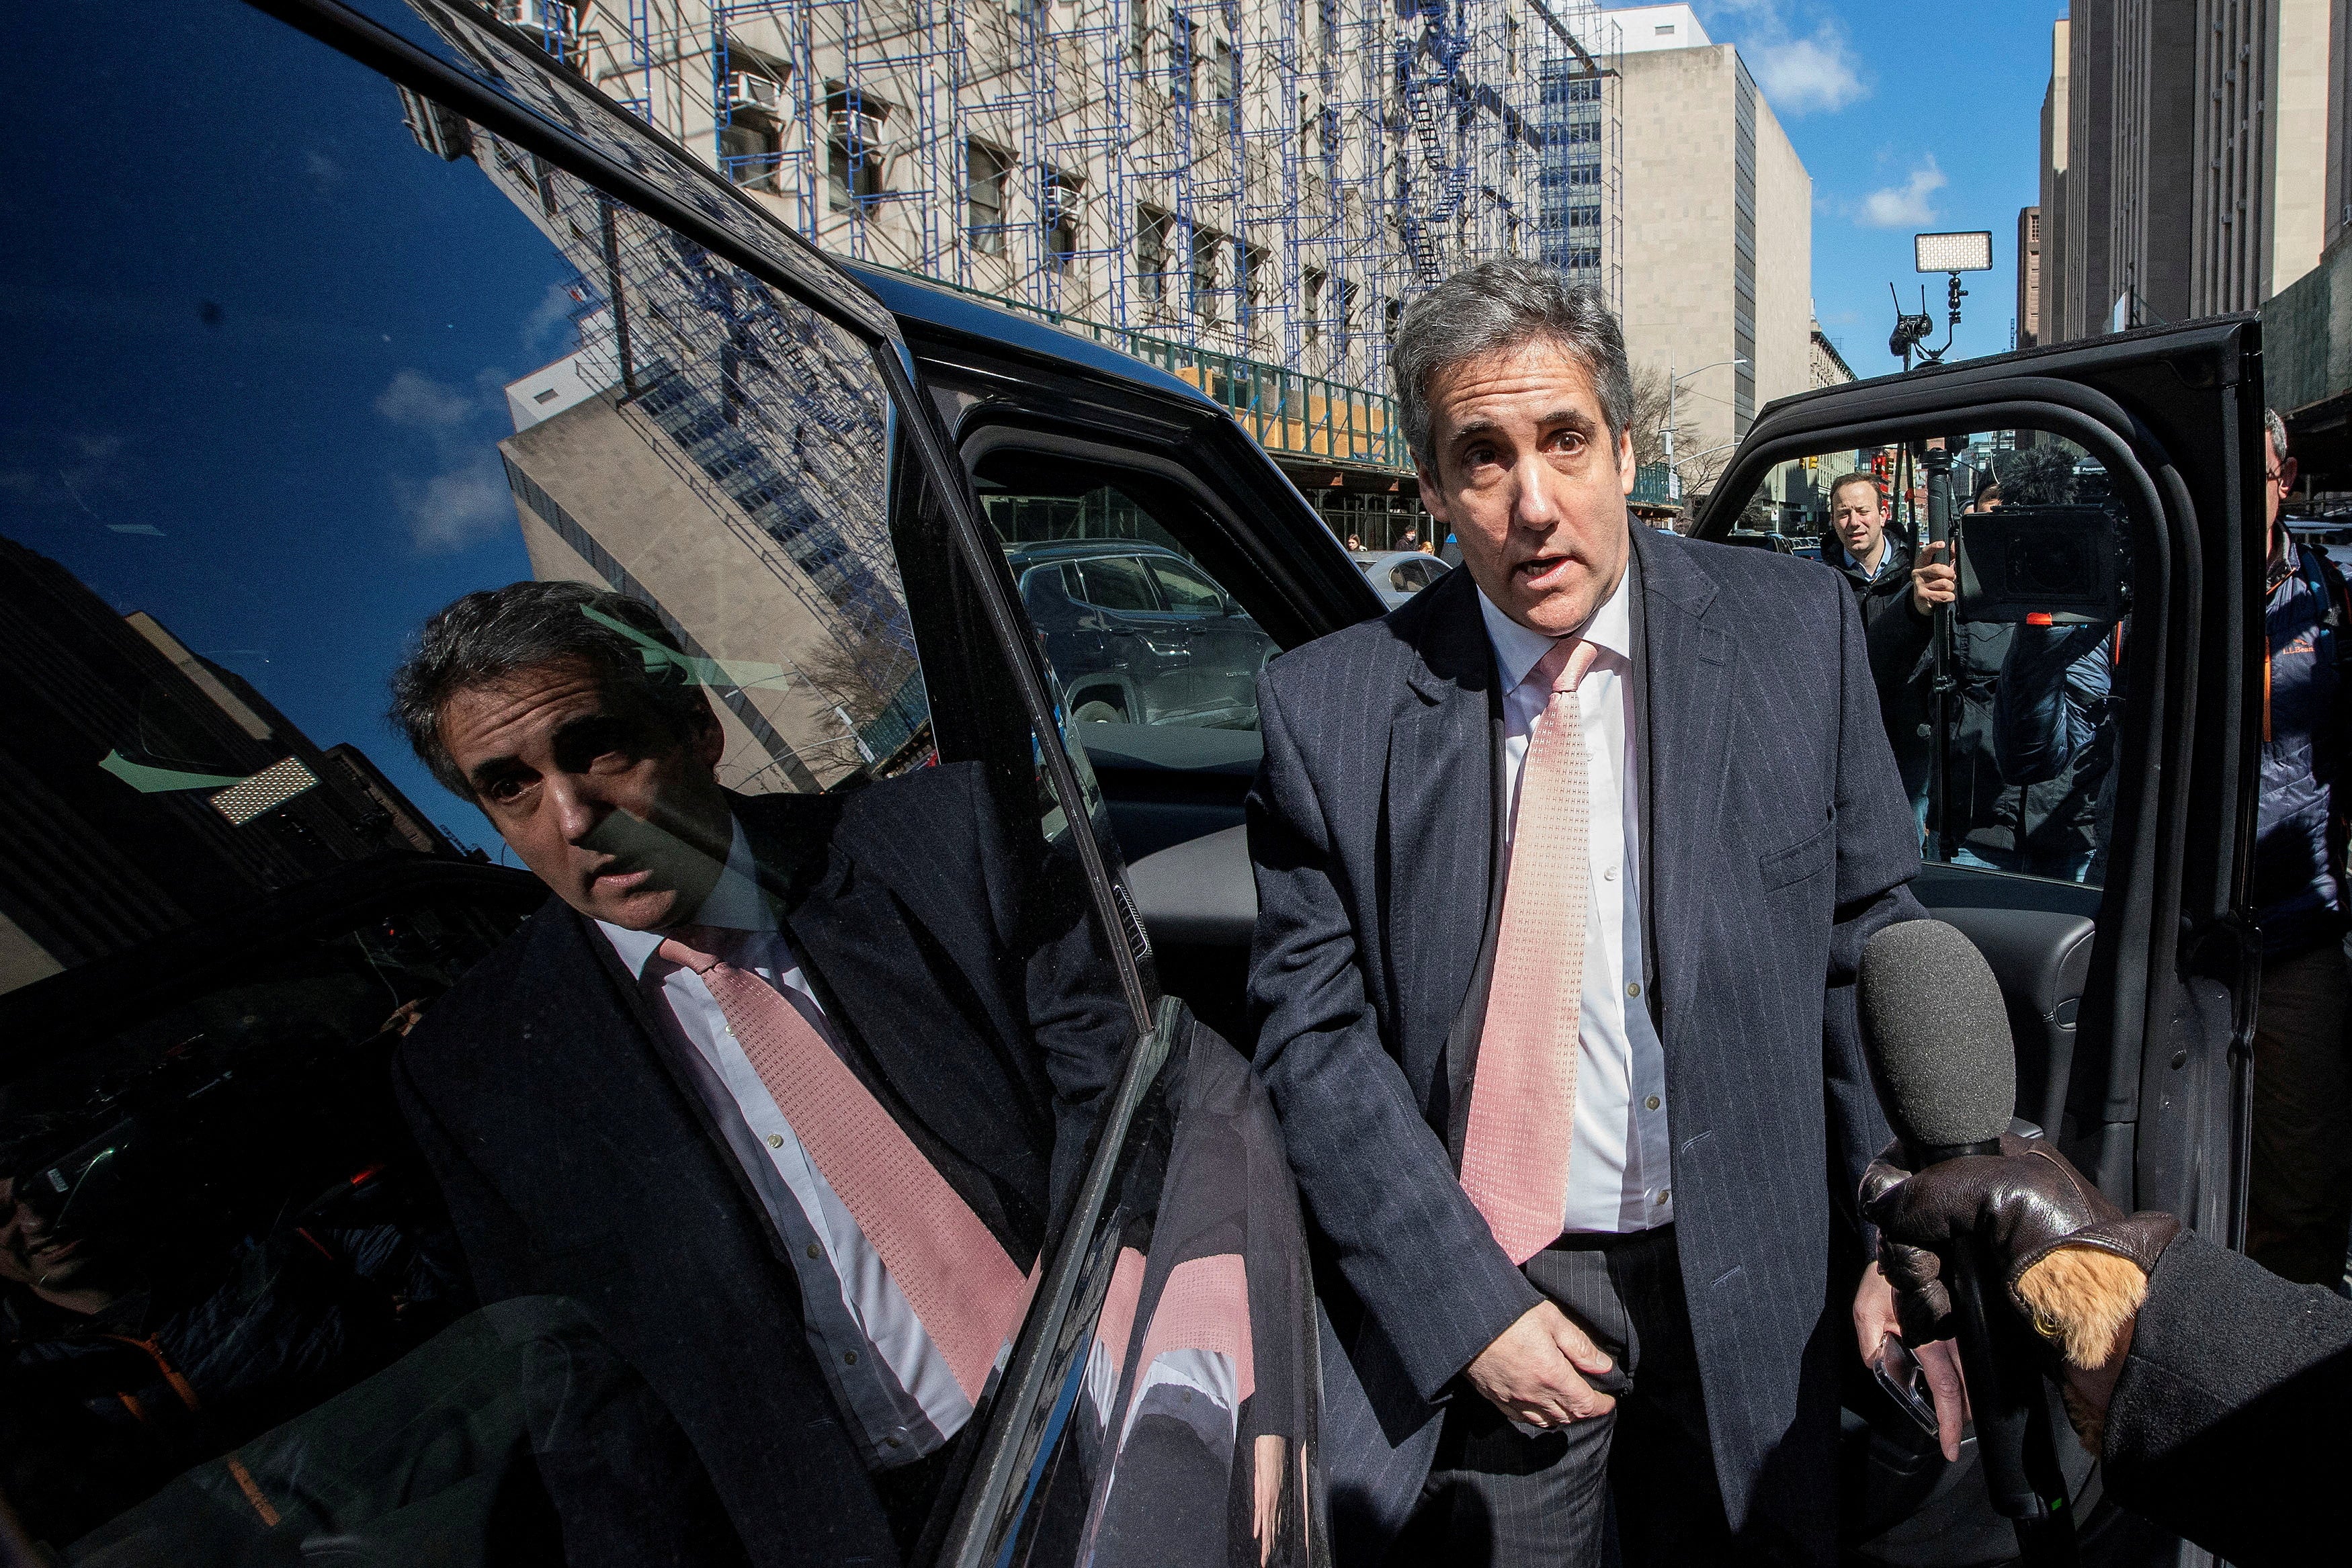 Michael Cohen, former attorney for former US president Donald Trump, arrives to the New York Courthouse